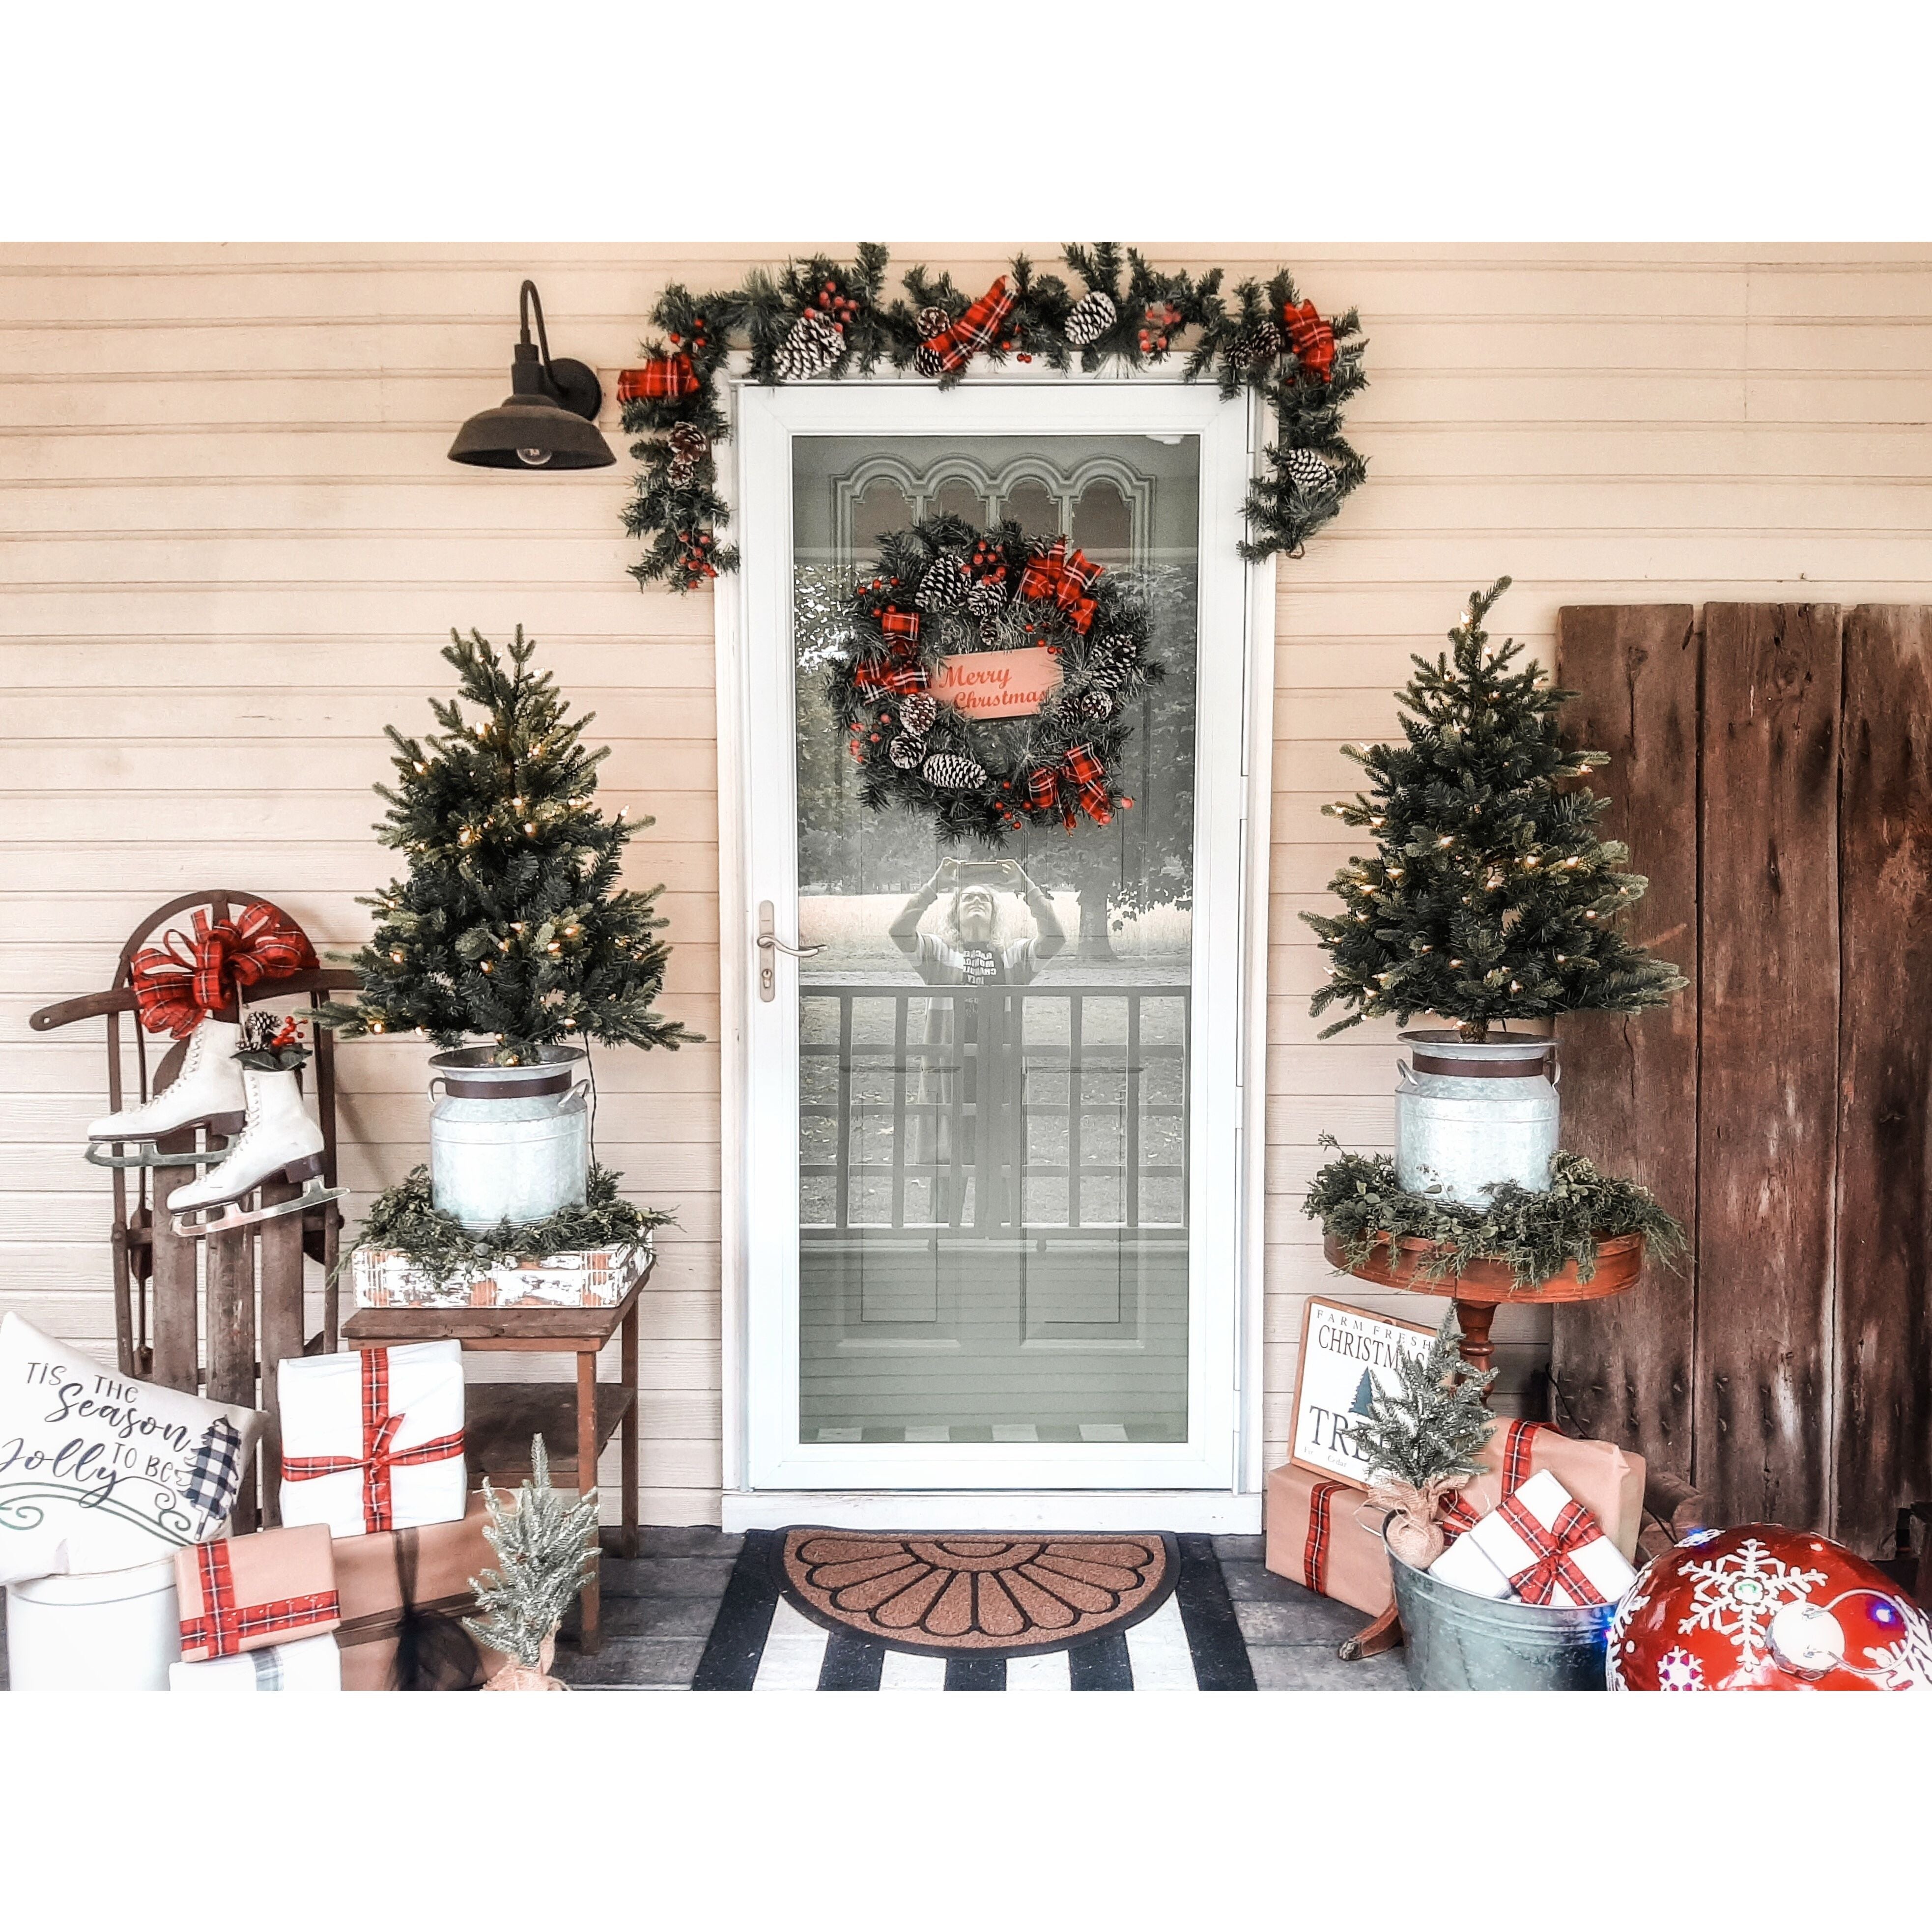 Fraser Hill Farm -  3.5-Ft. Porch Accent Tree in Rustic Farmhouse Metal Jug with Warm White LED Lighting